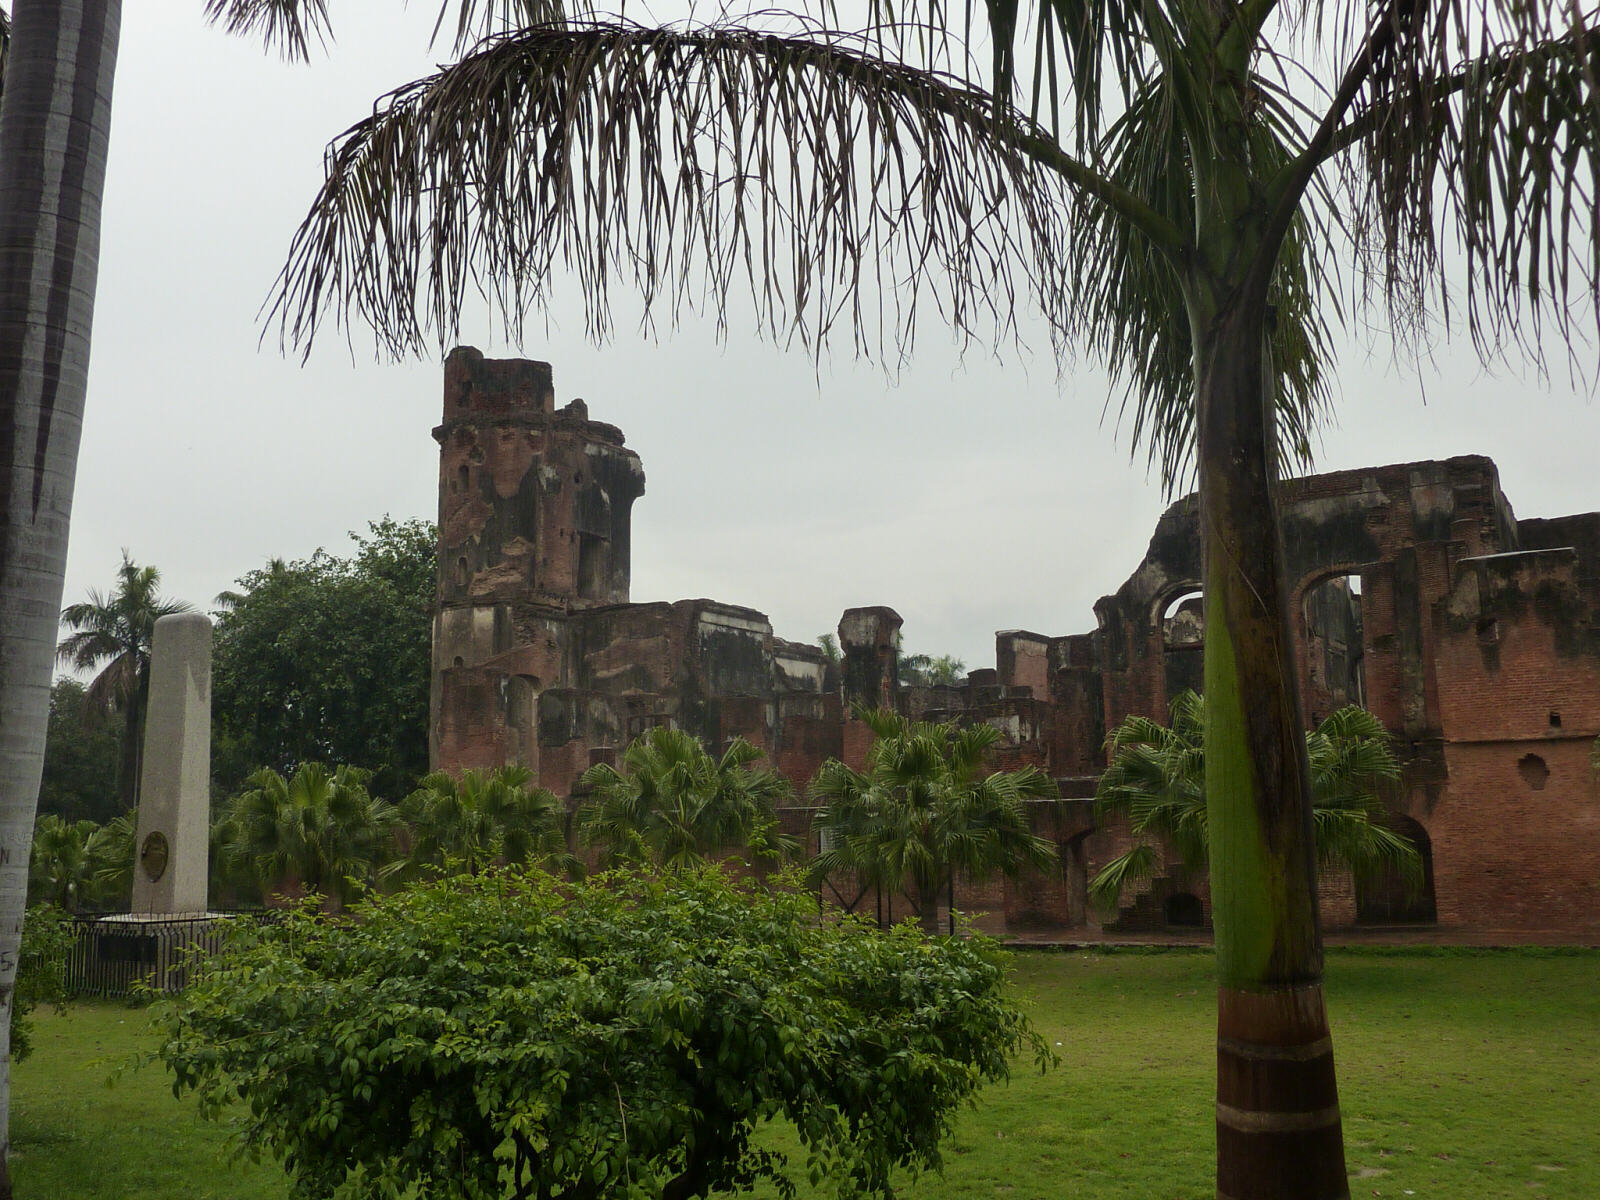 The former Residency buildings in Lucknow, India